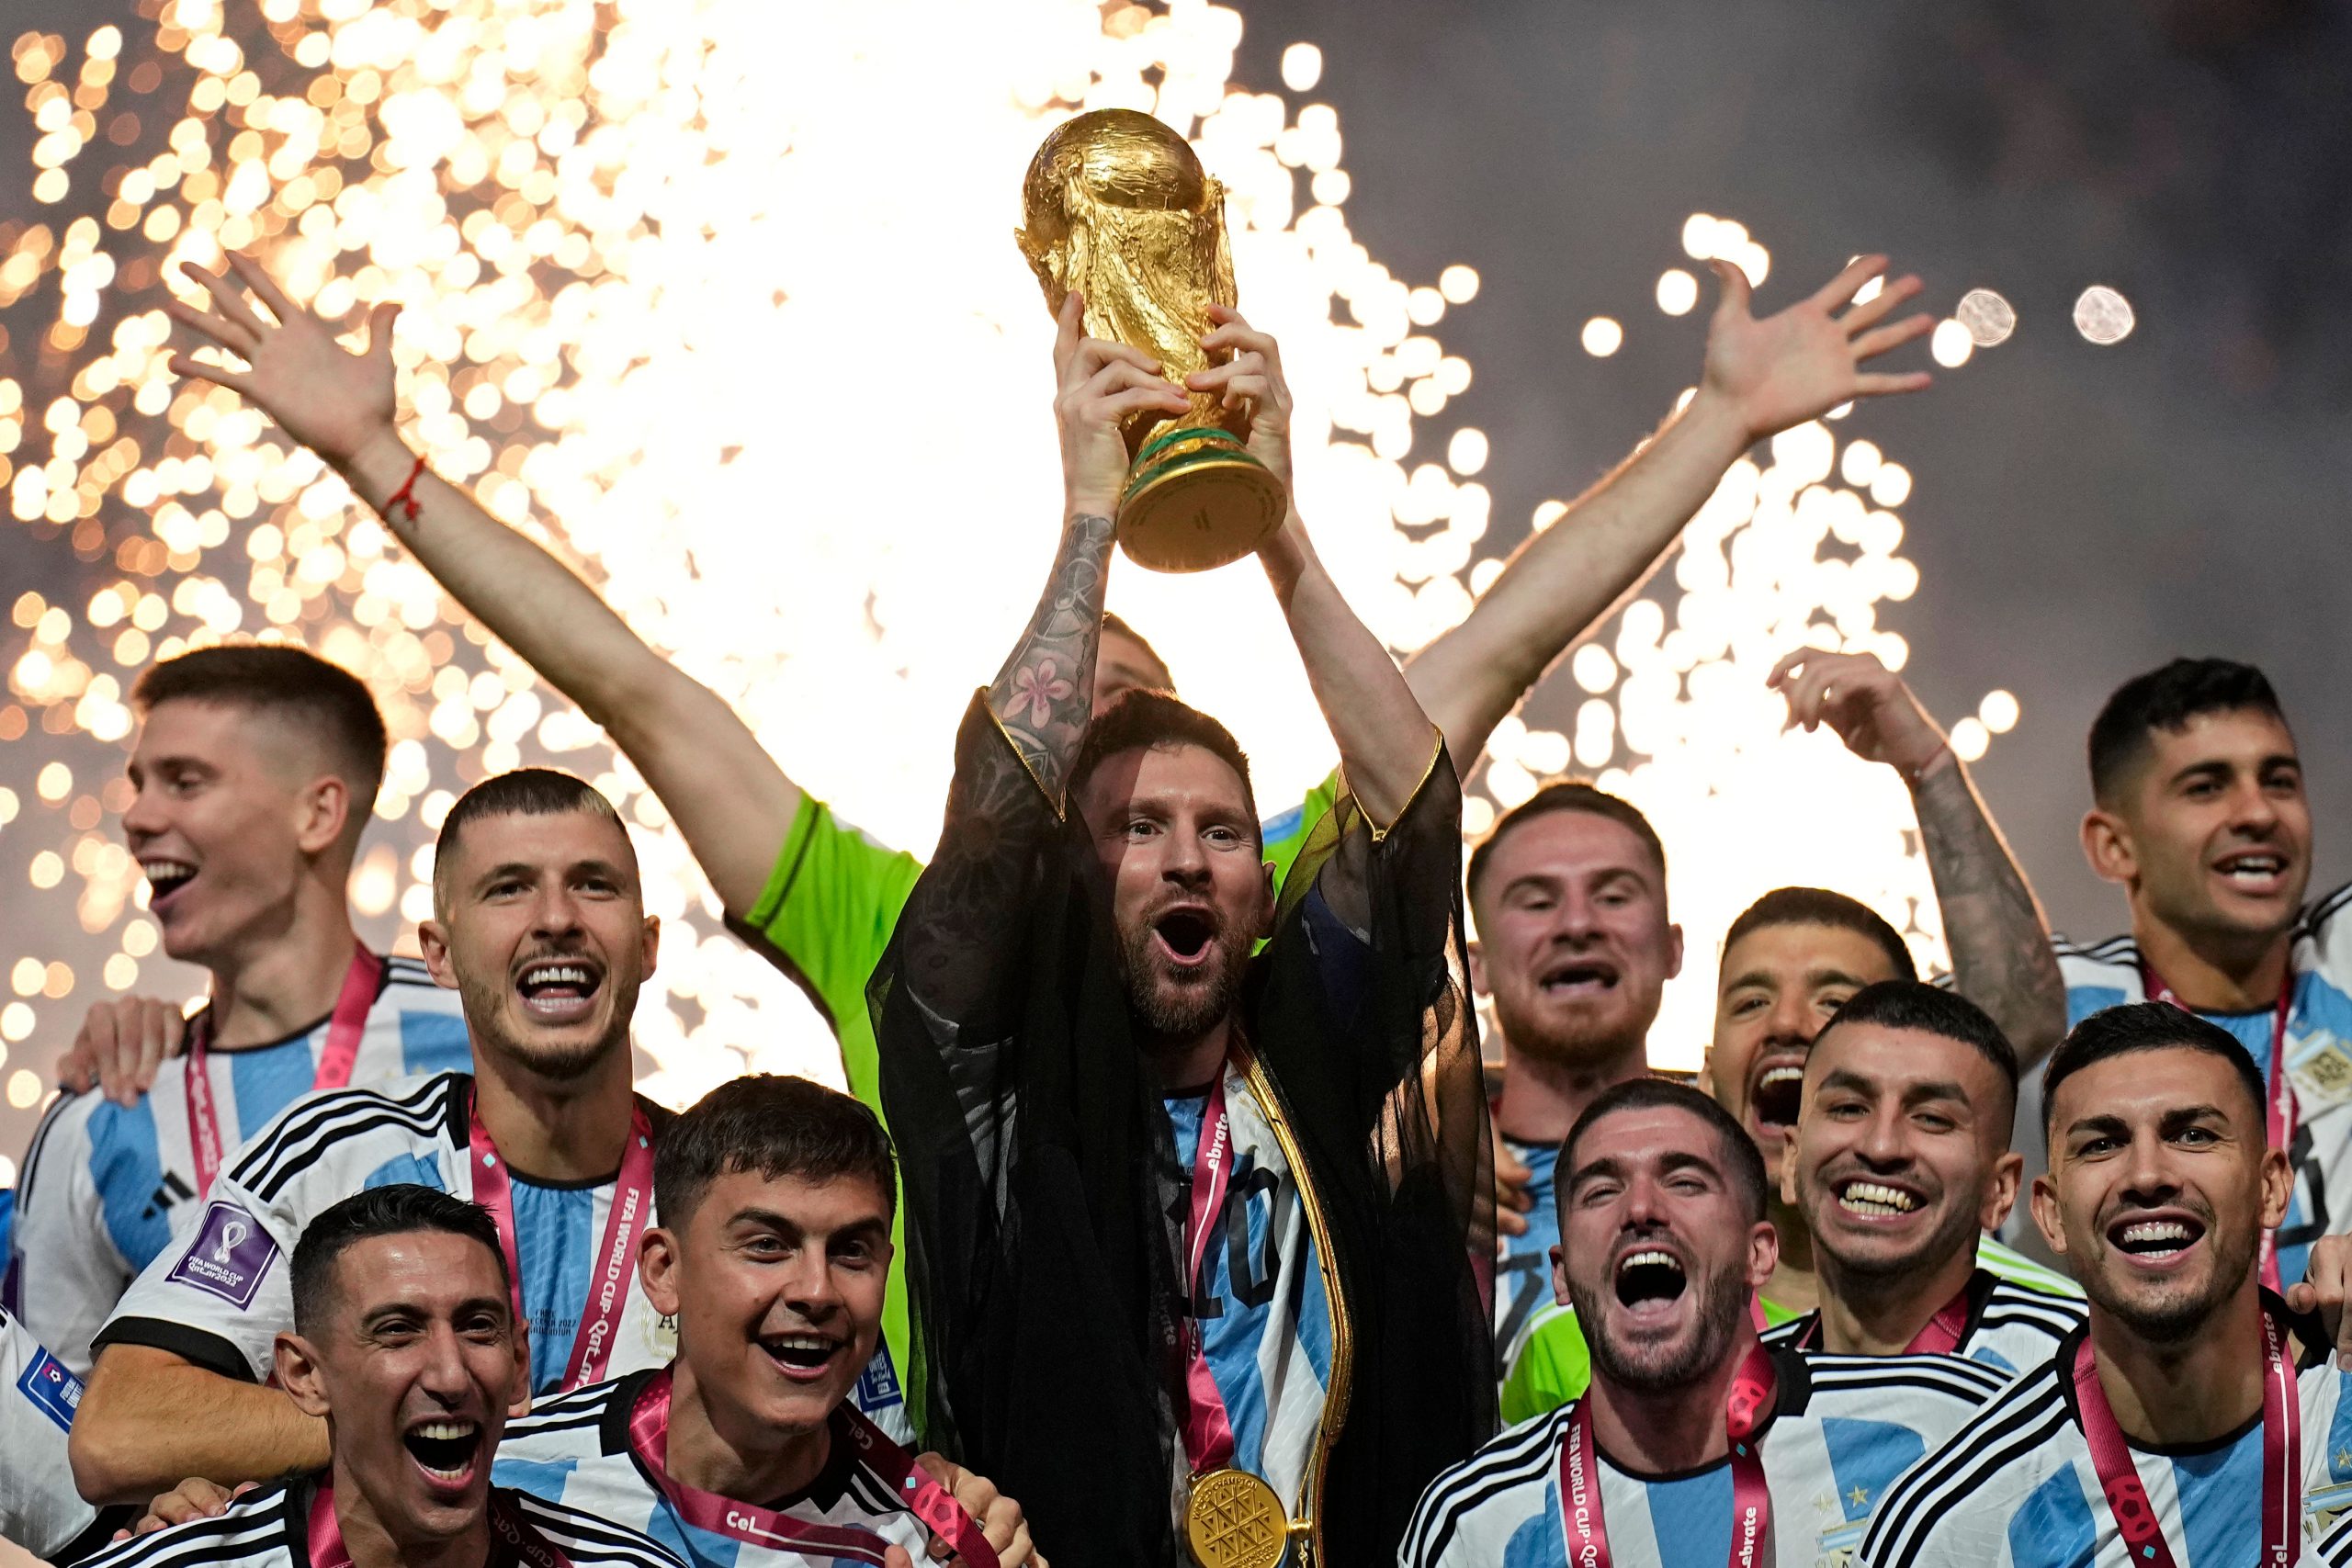 Lionel Messi thanks family, praises team in first social media post after winning FIFA World Cup